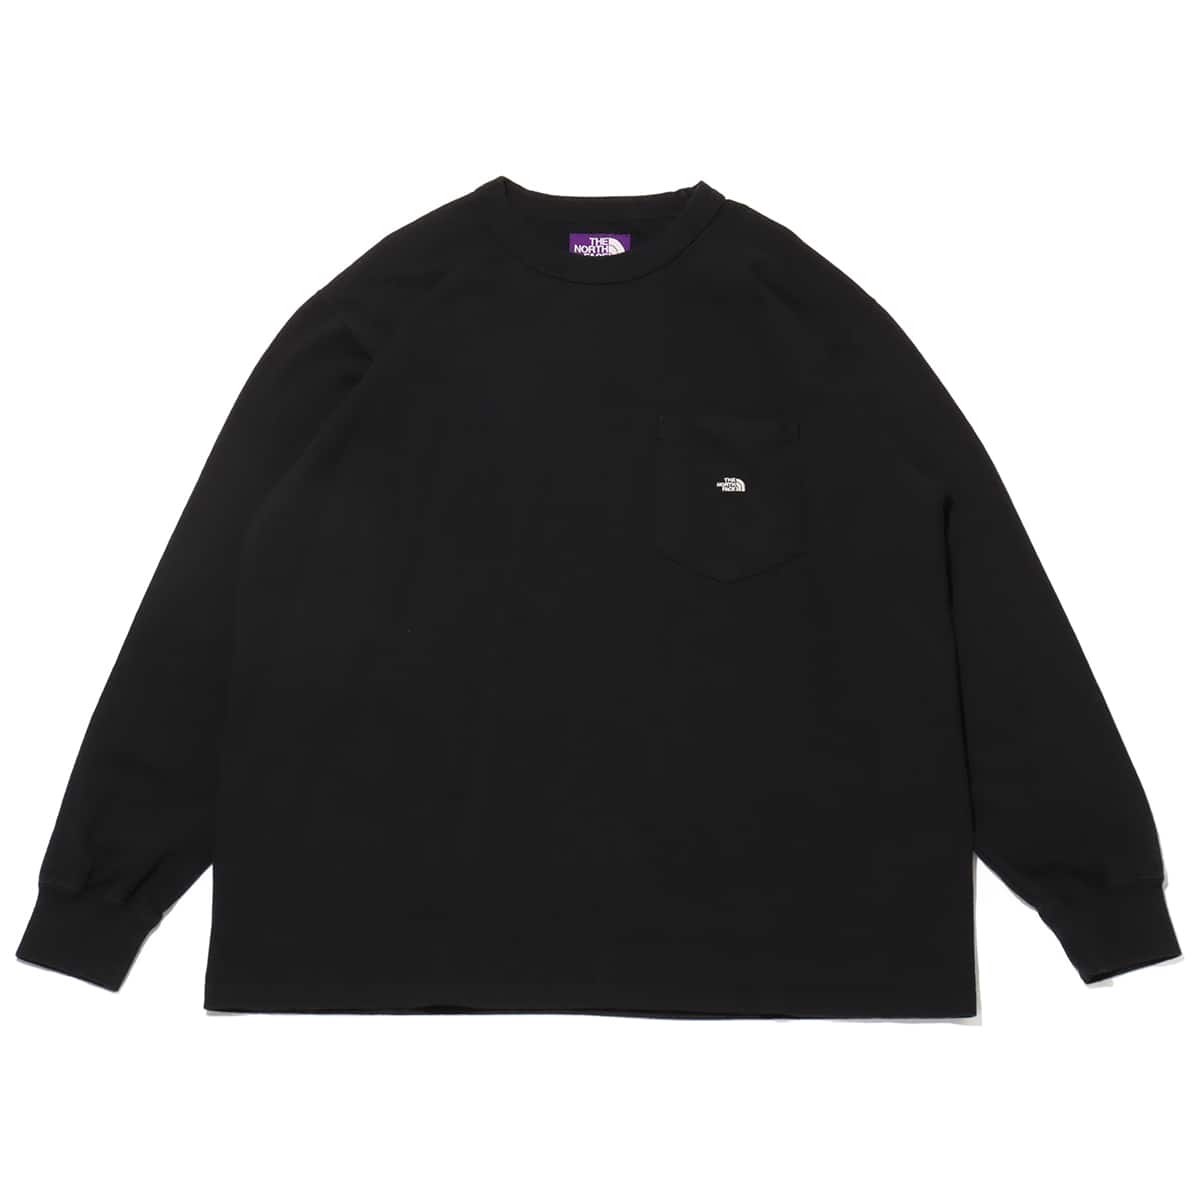 THE NORTH FACE PURPLE LABEL 7oz Long Sleeve Pocket Tee Black X Off 